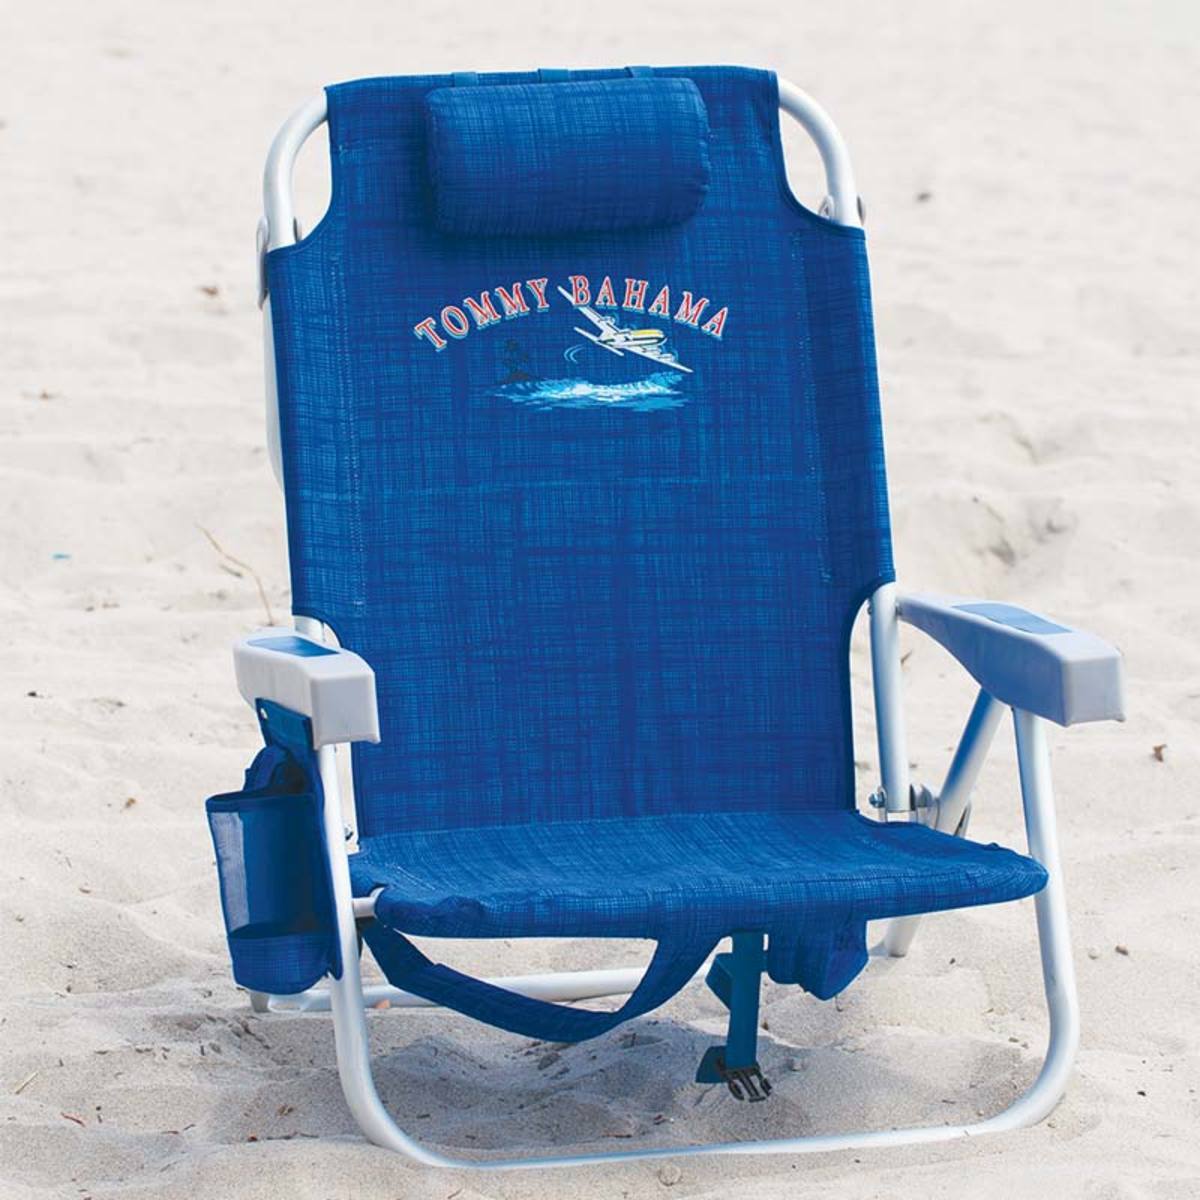 Tommy Bahama Backpack Beach Chairs (2 PACK Blue | vlr.eng.br